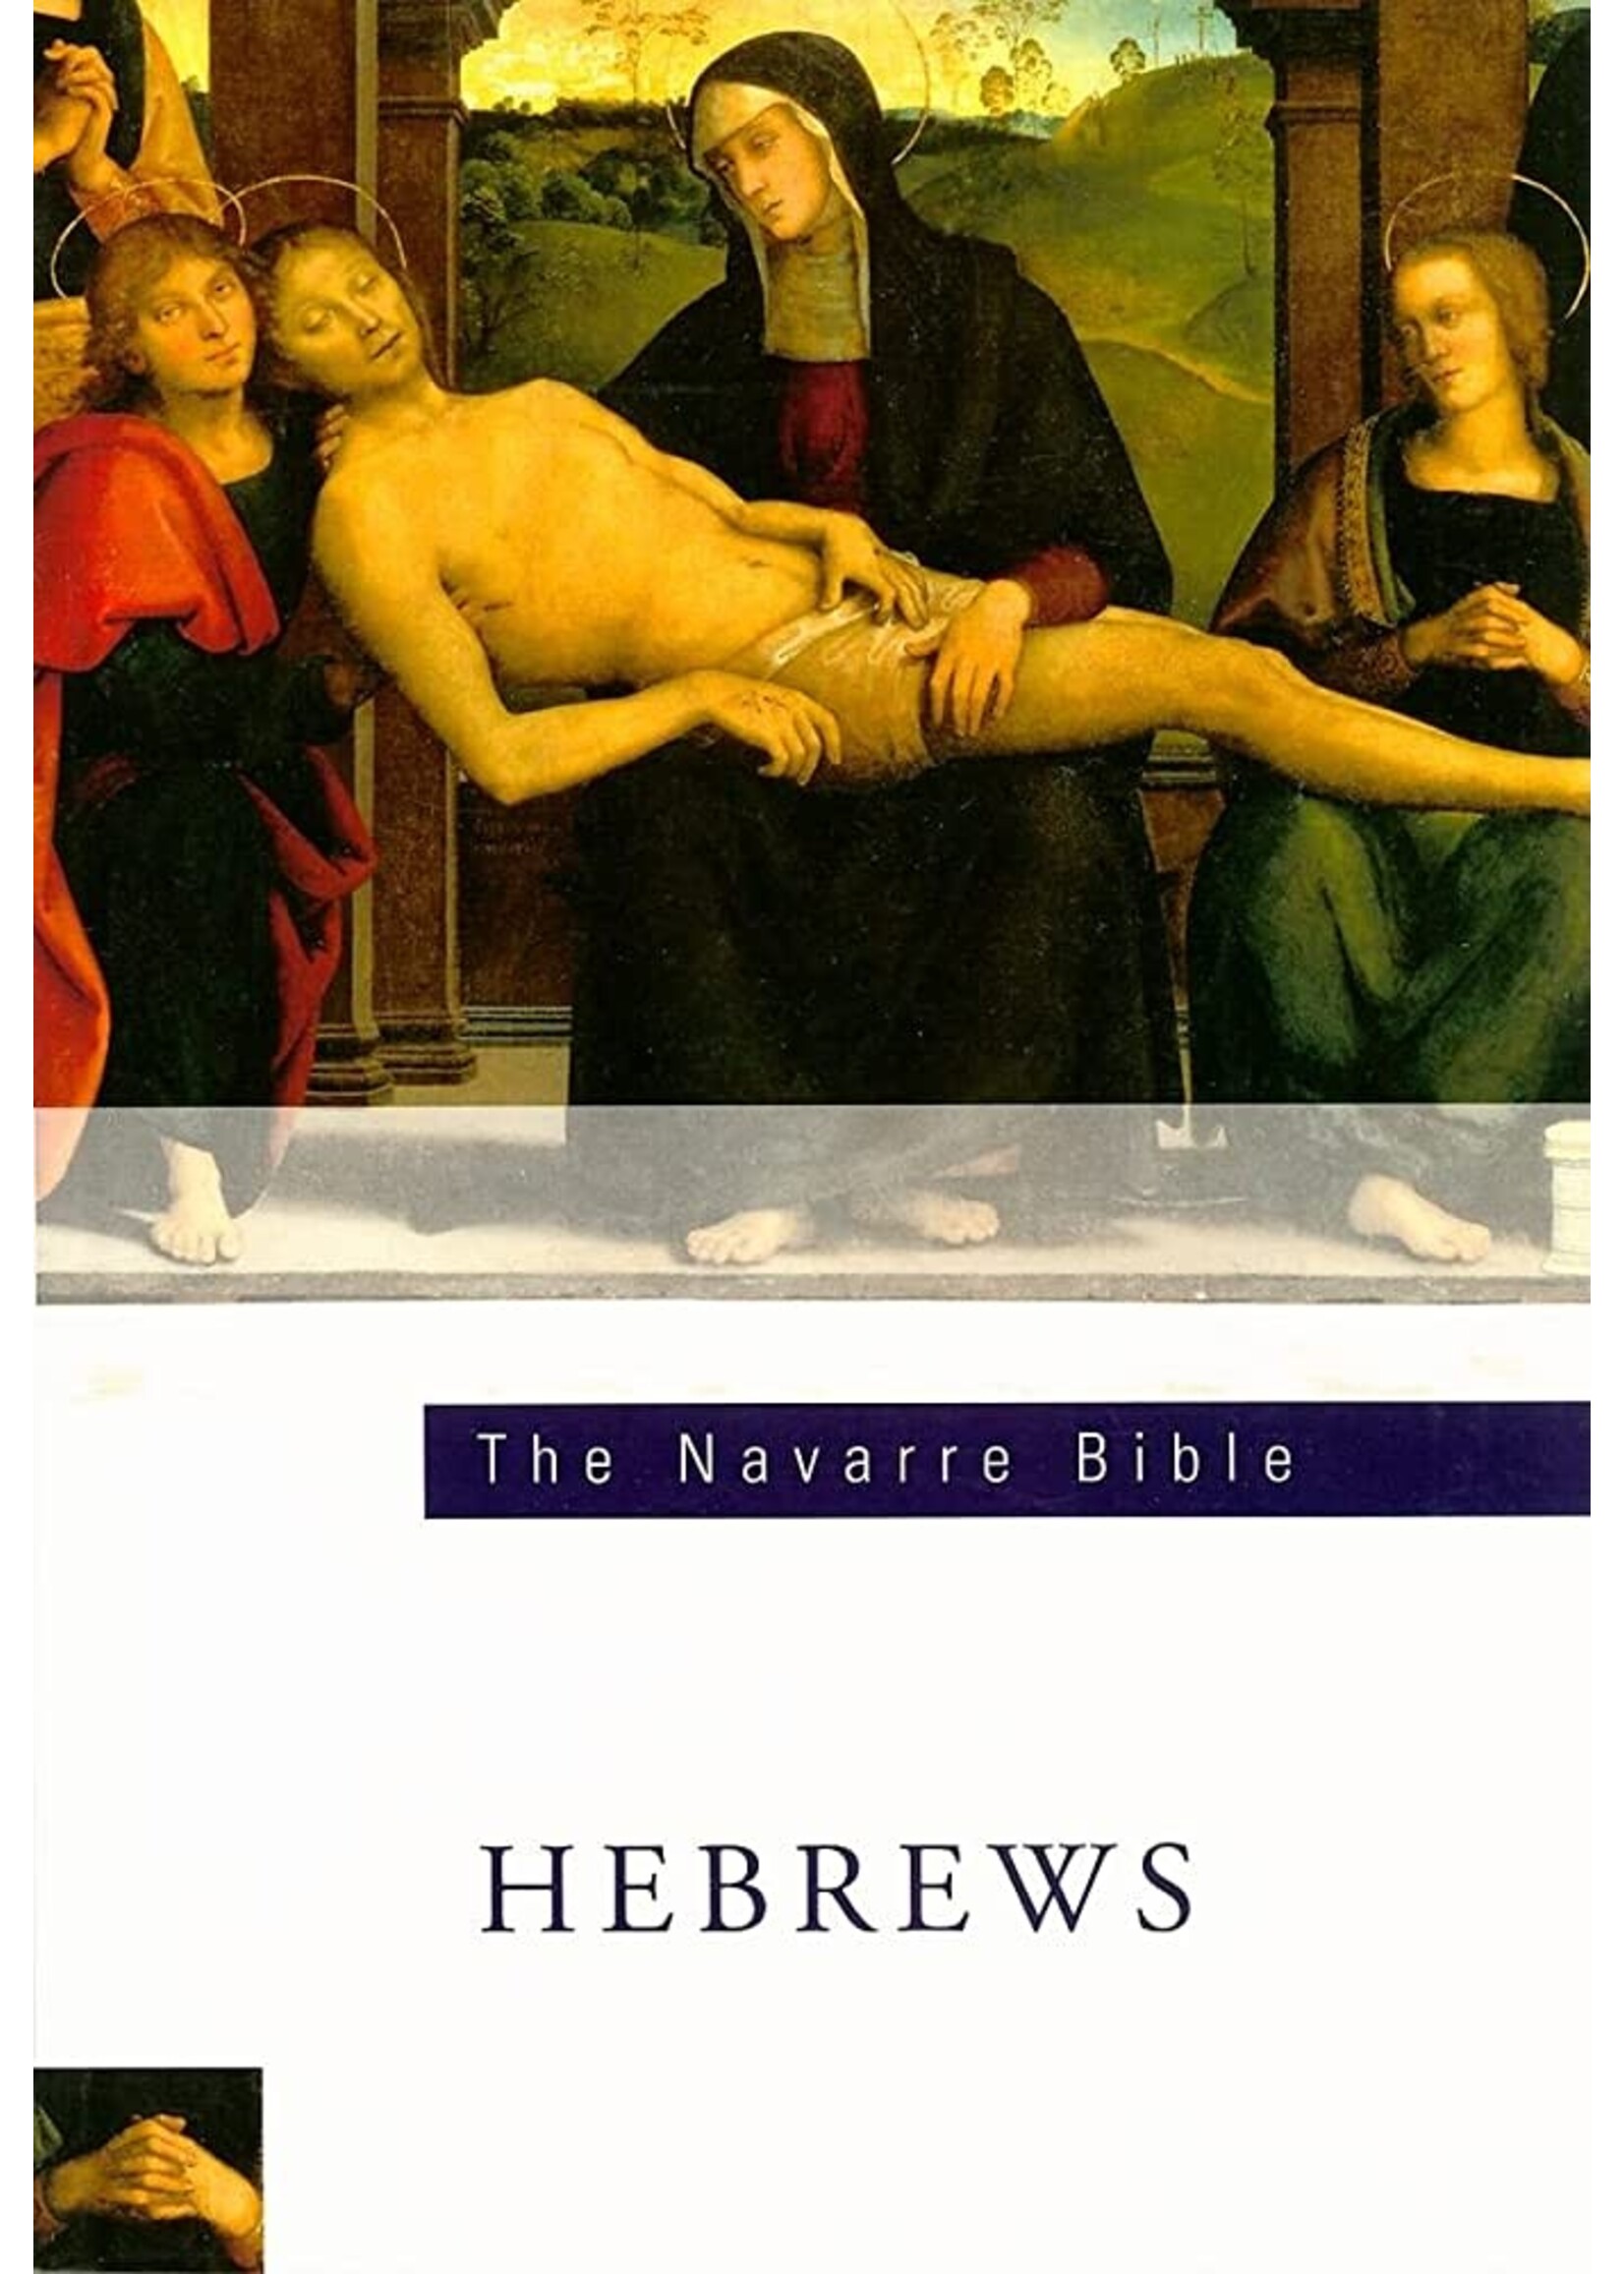 The Navarre Bible: Letter to the Hebrews